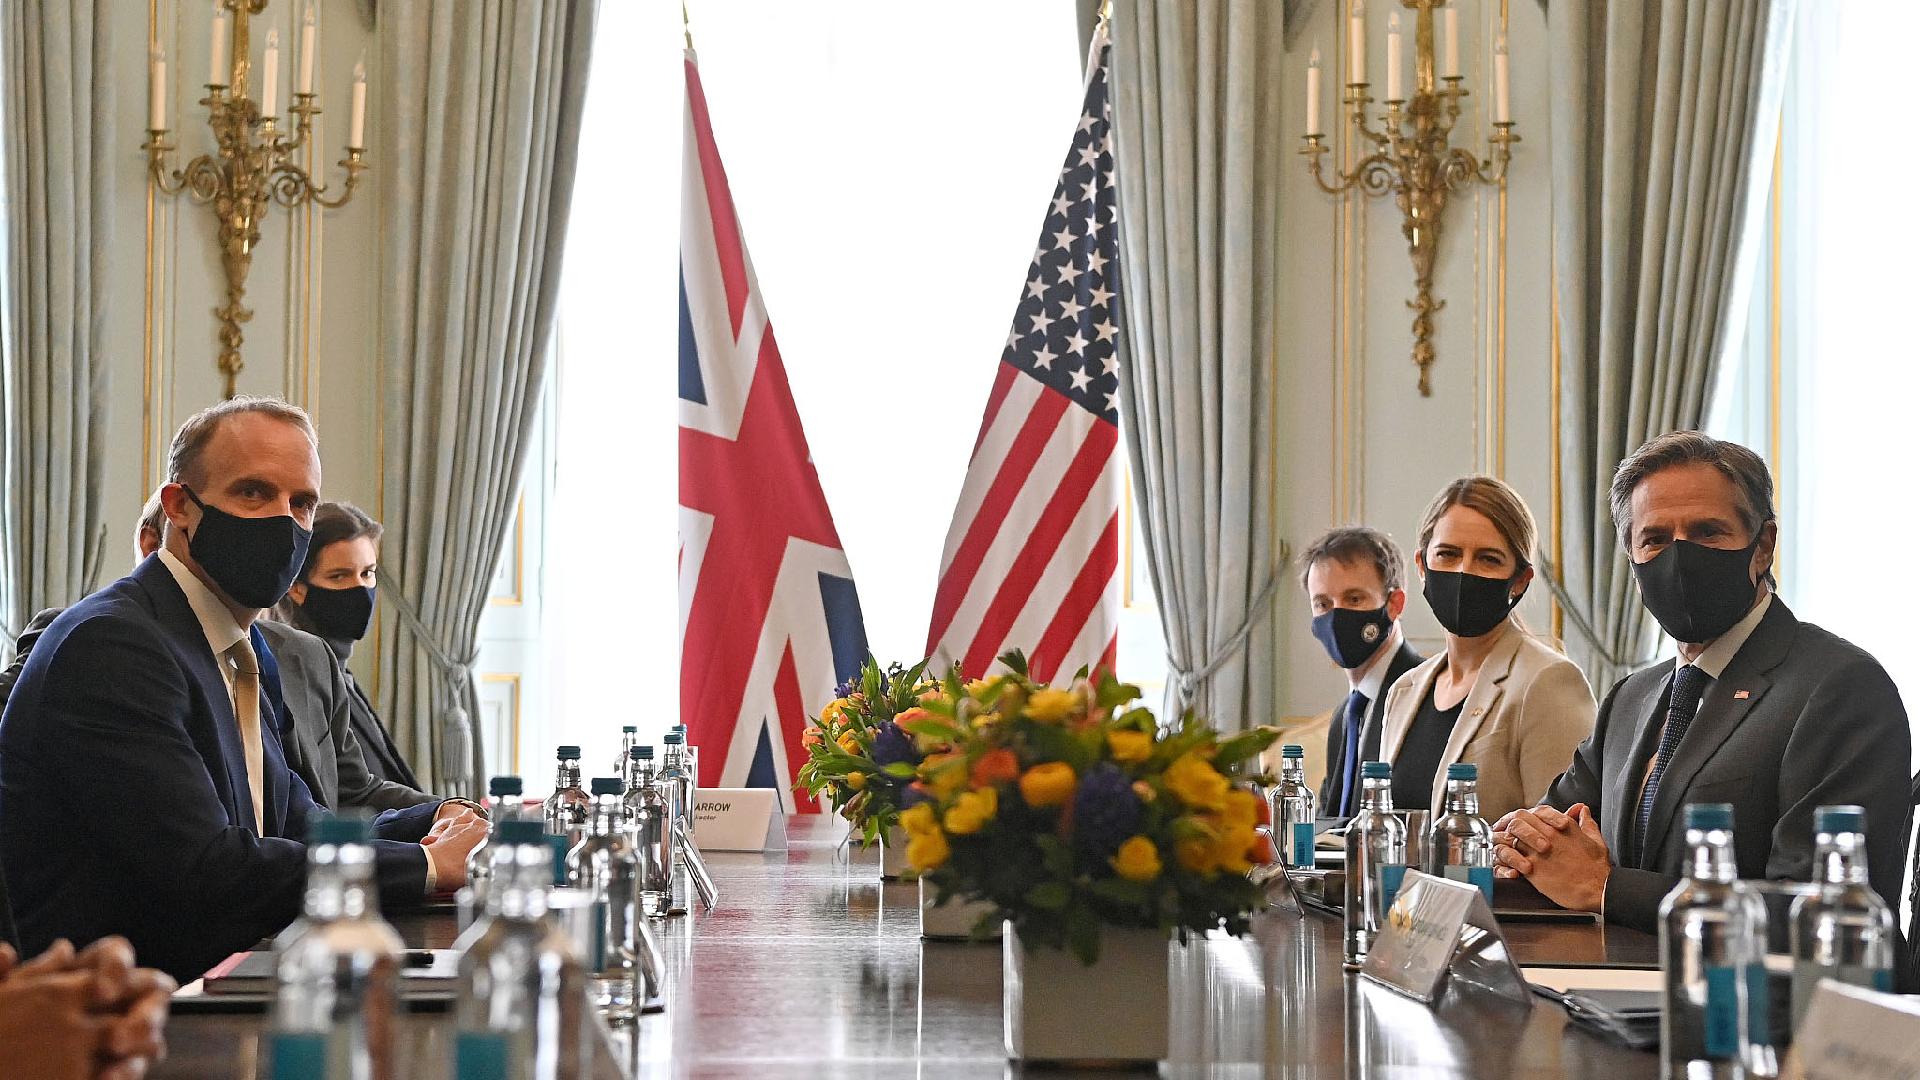 UK hosts first inperson G7 Foreign Ministers' Meeting since COVID19